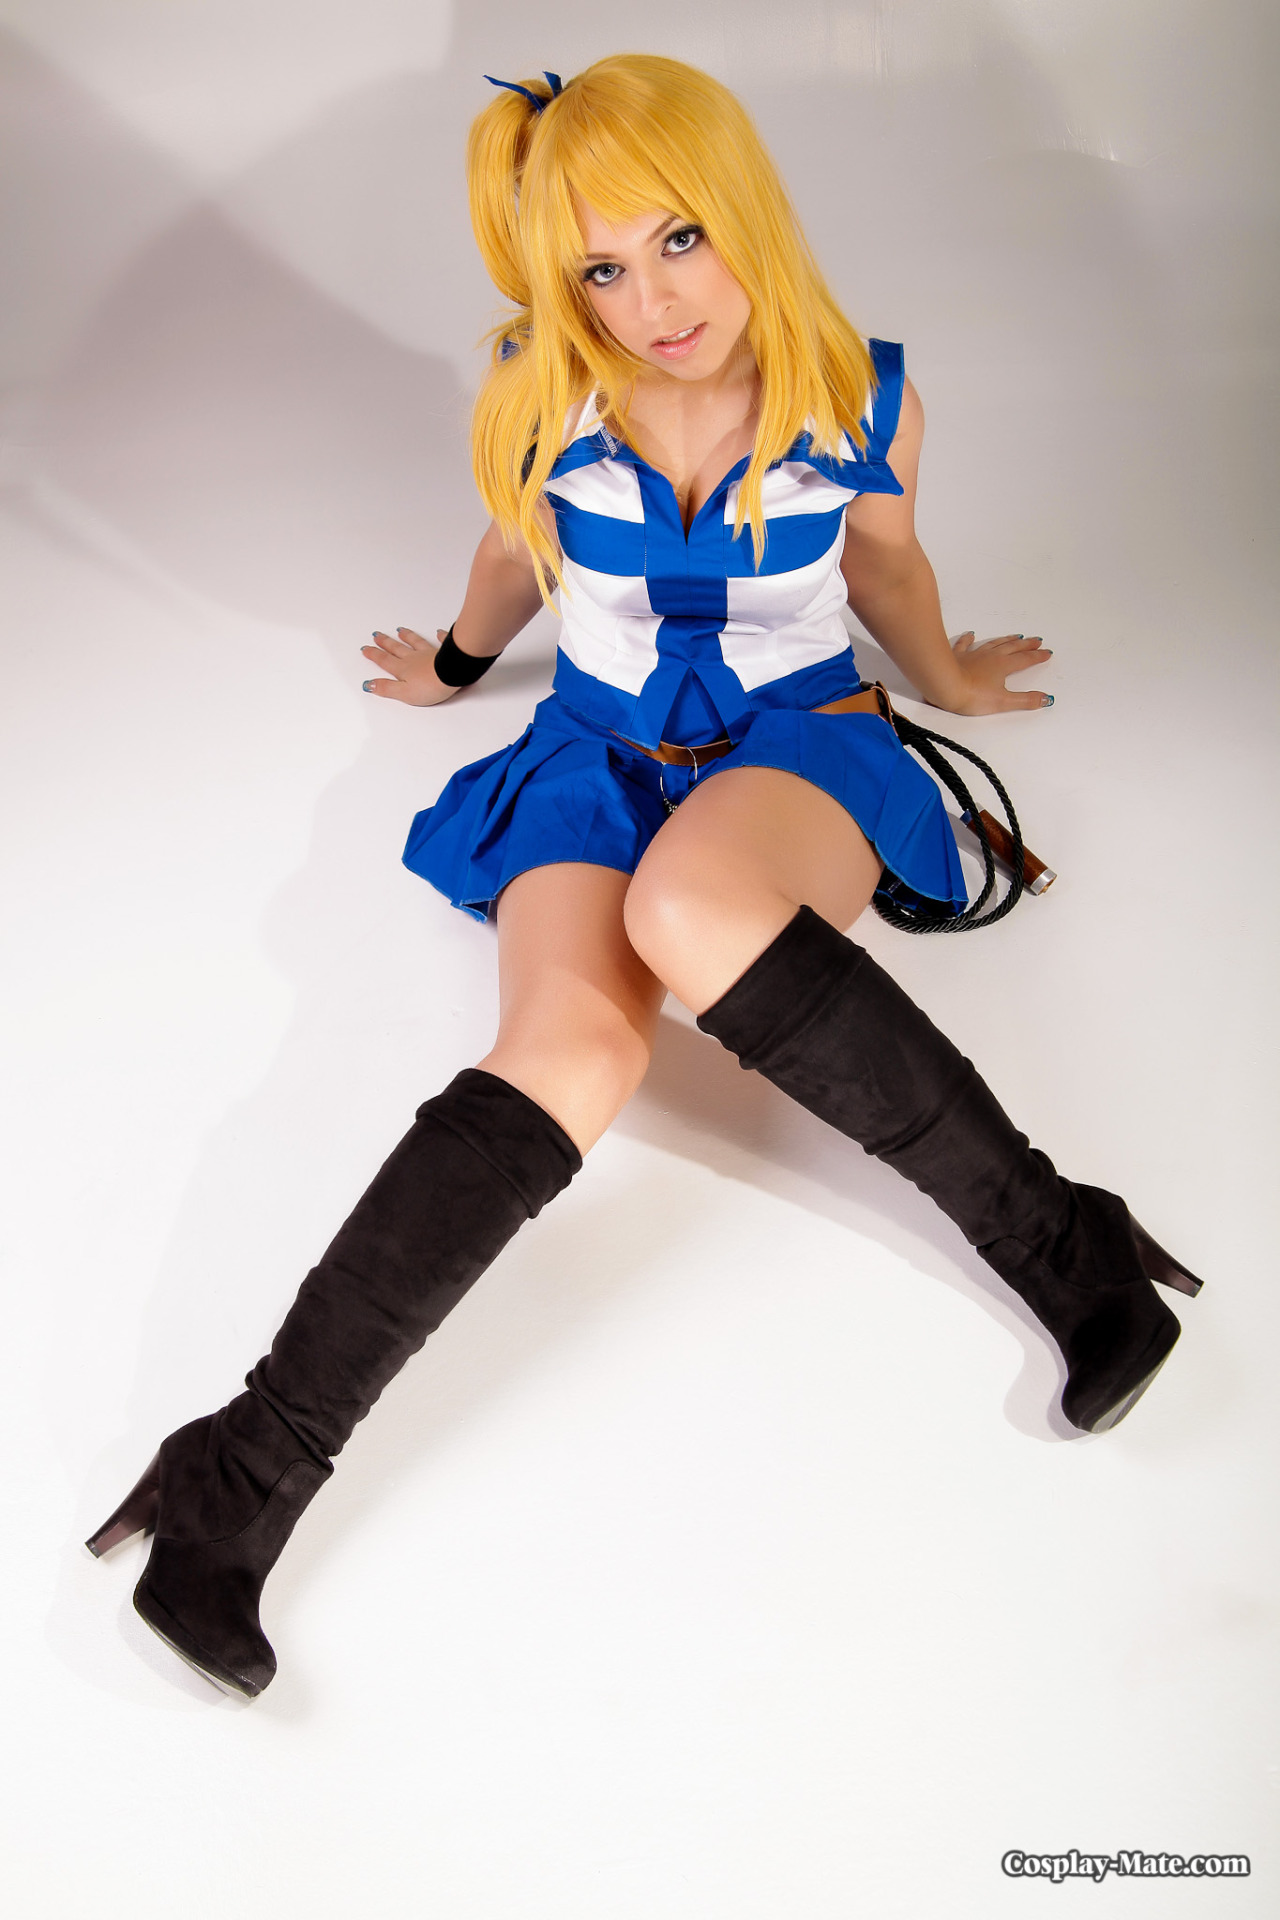 More of the Lucy Hearfilia cosplay. There is 60 more pictures of her doing a slow